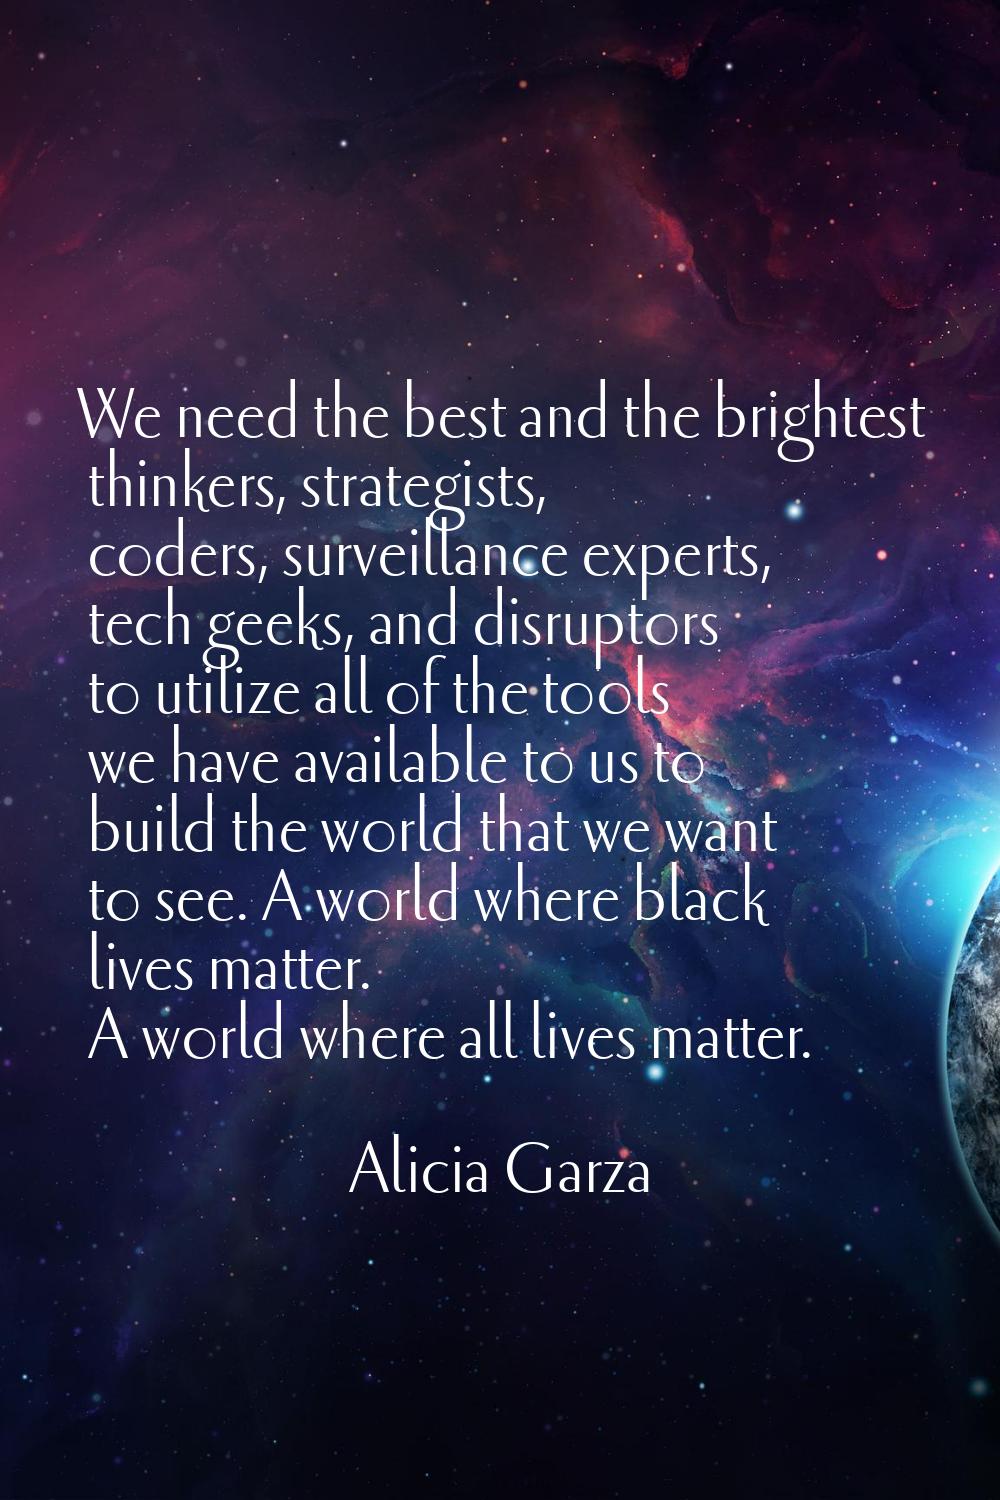 We need the best and the brightest thinkers, strategists, coders, surveillance experts, tech geeks,